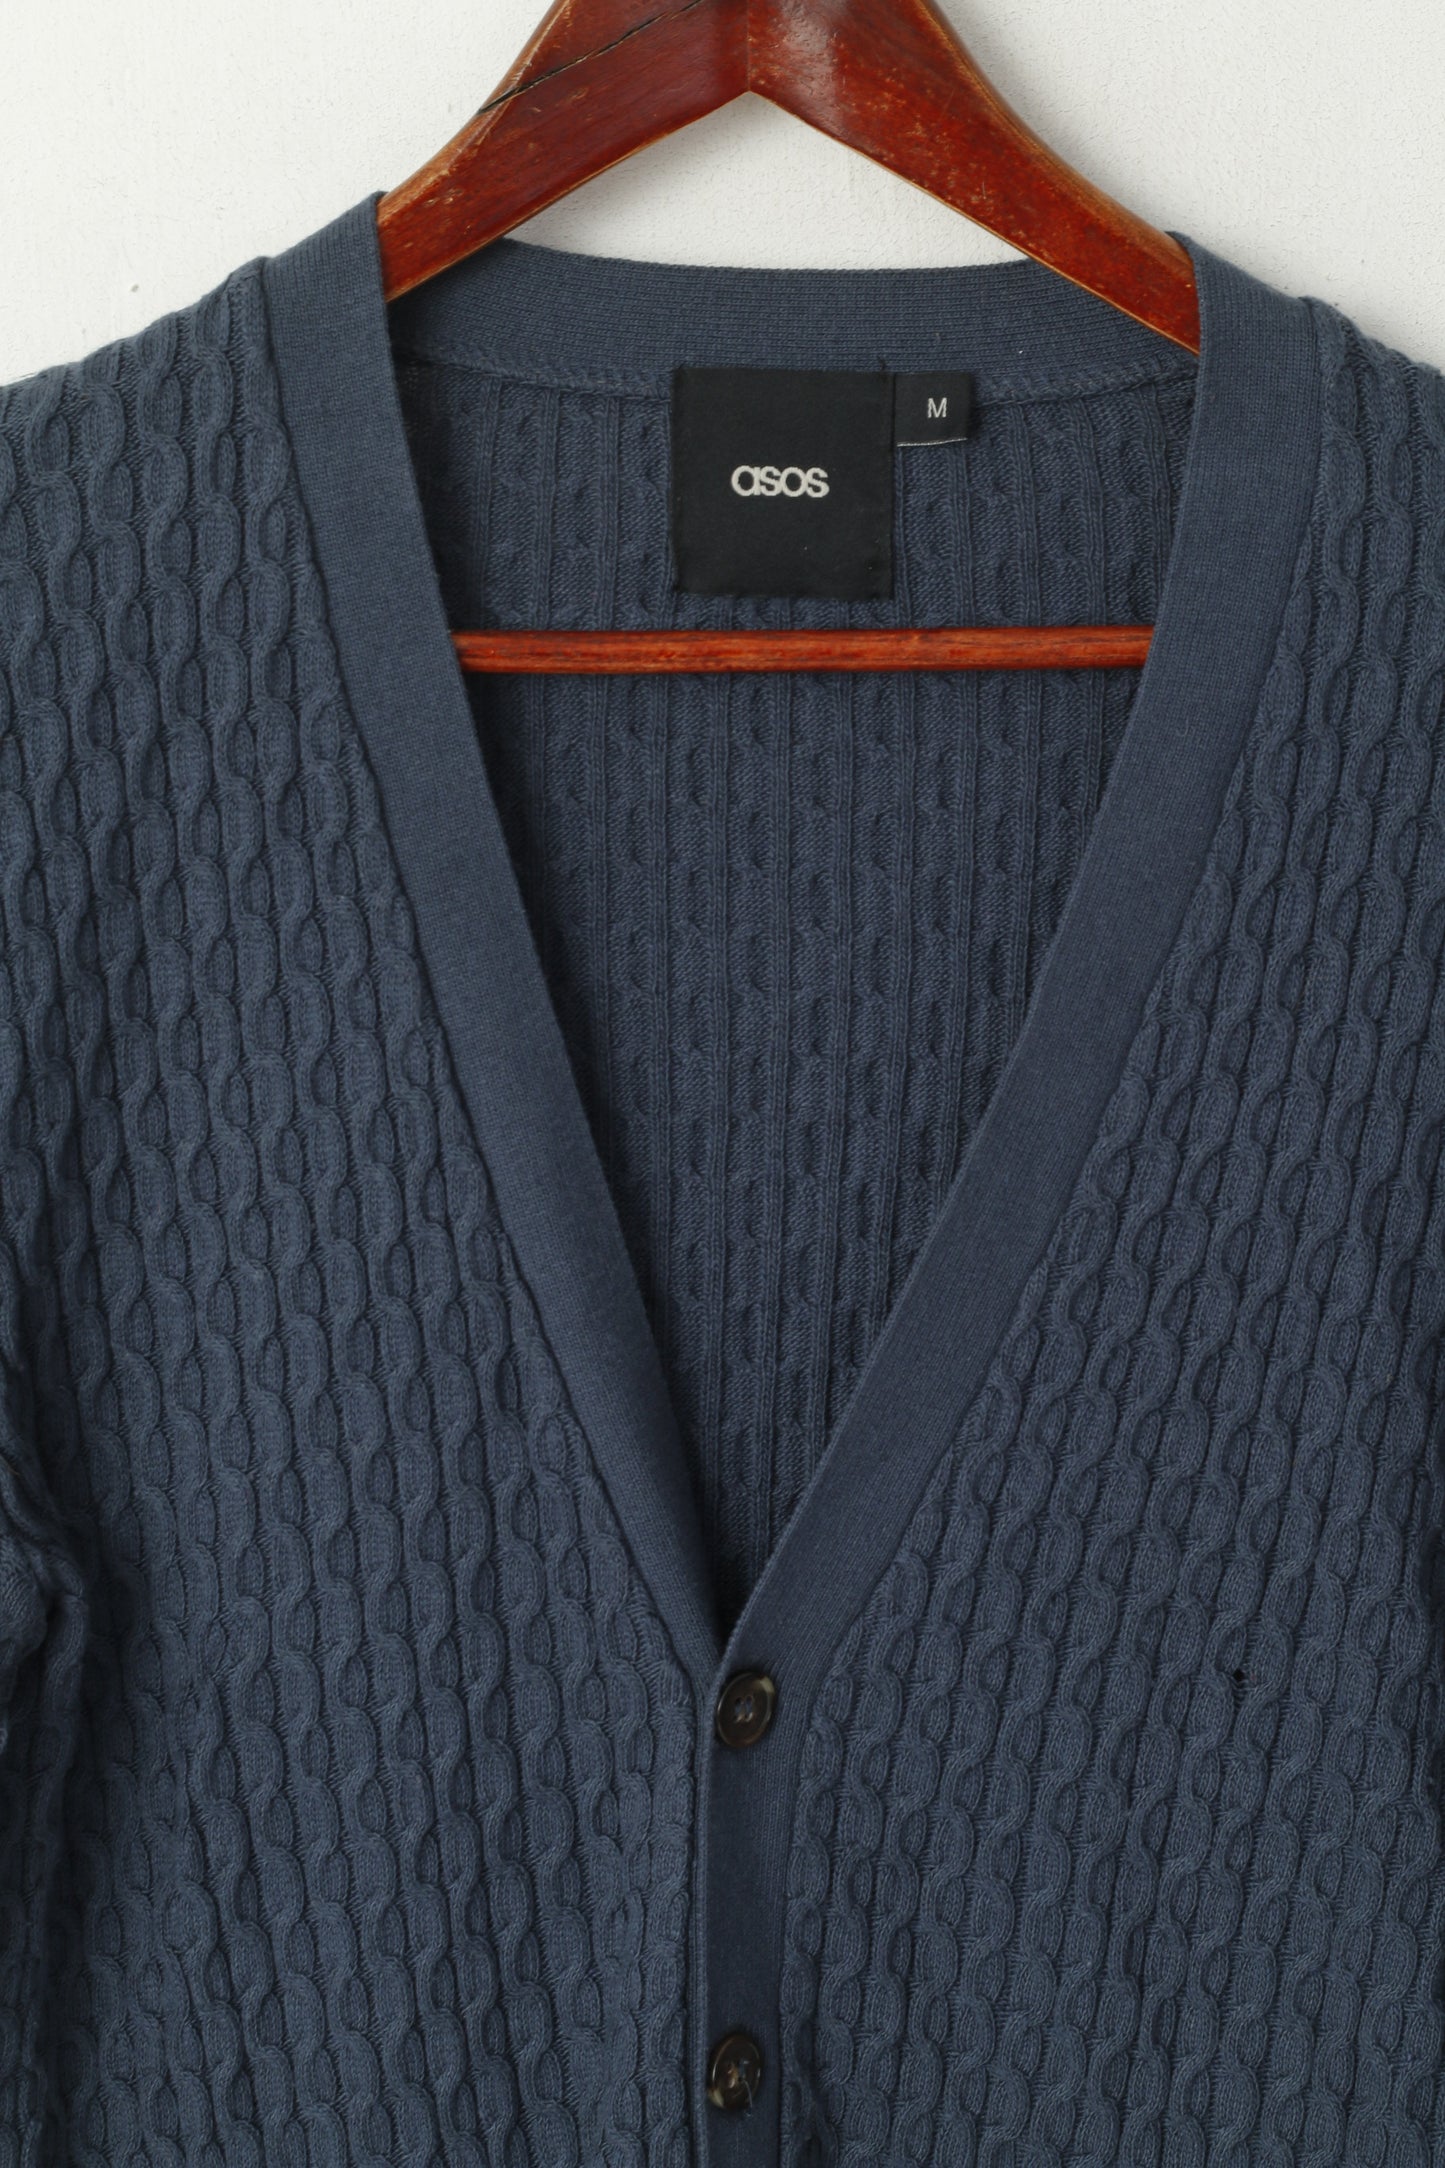 Asos Men M Button Front Cardigan Navy Knit Stretch Soft Cotton Fit Sweater